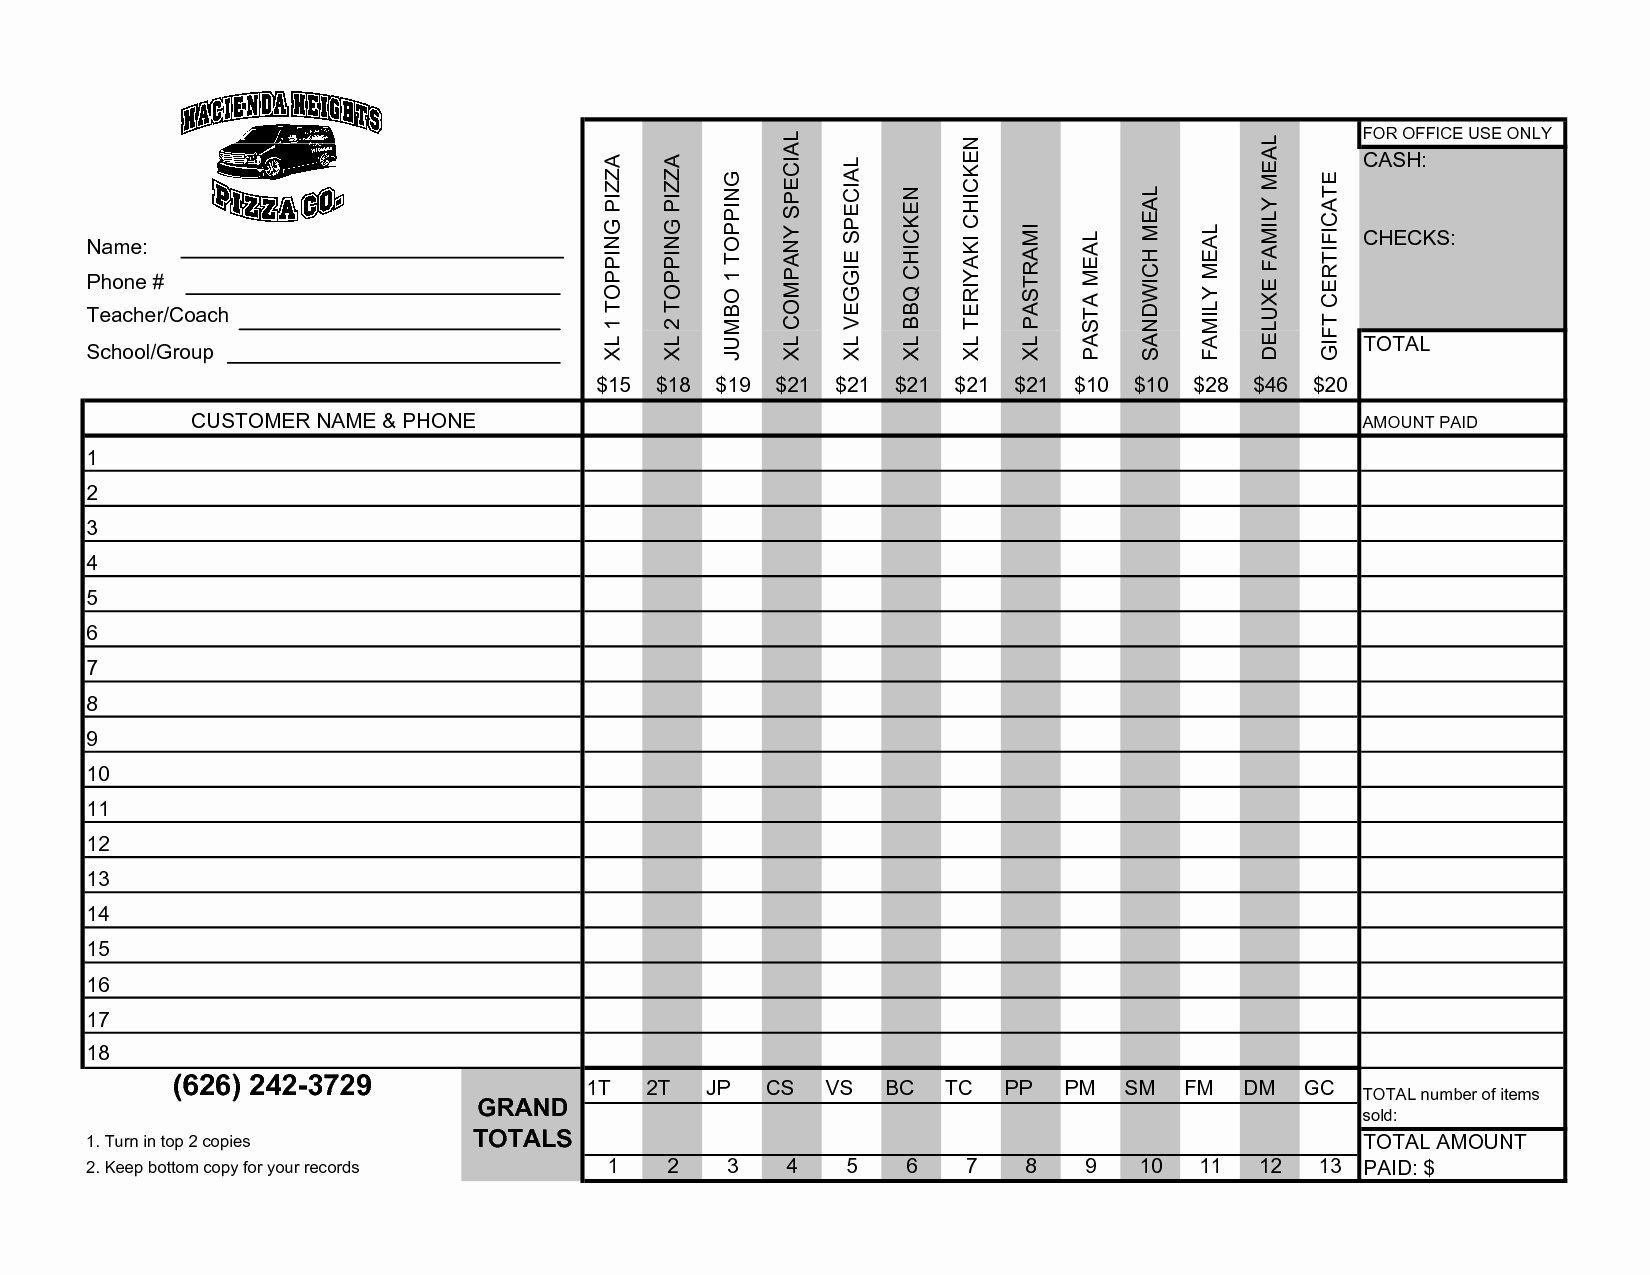 Fundraising order form Template Unique Fundraiser order form Template Excel the Ultimate